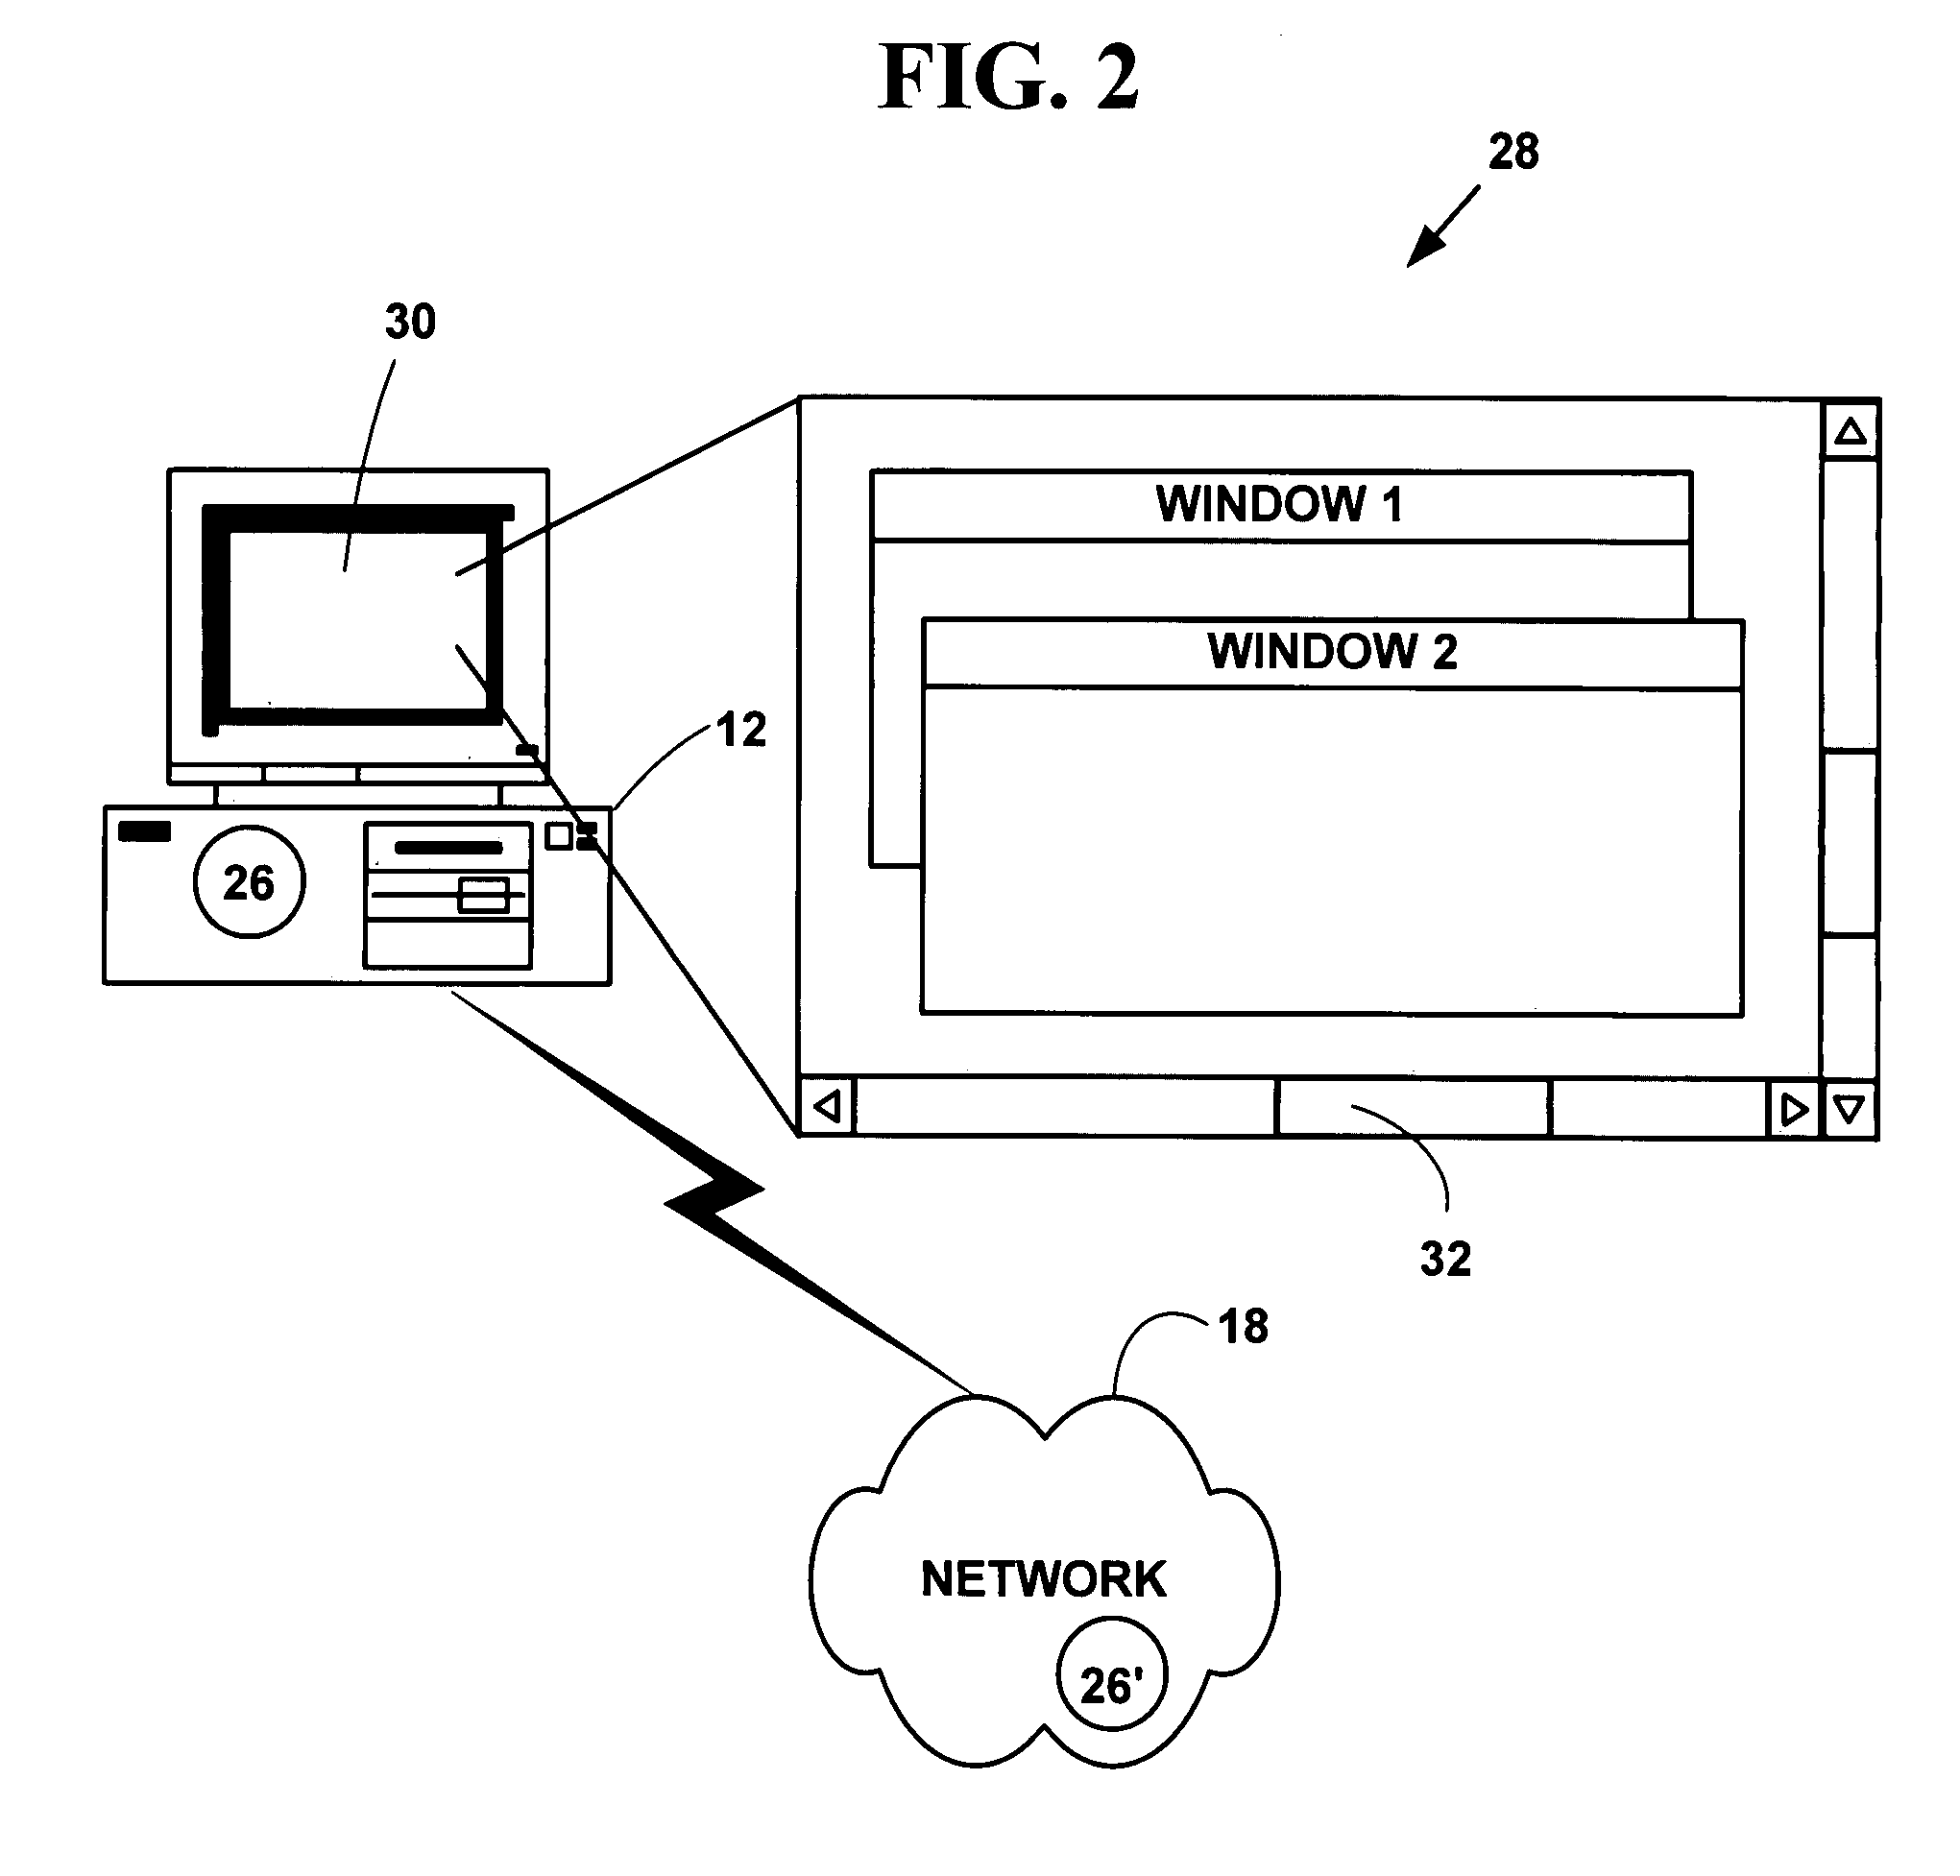 Method and system for organizing, storing, connecting and displaying medical information